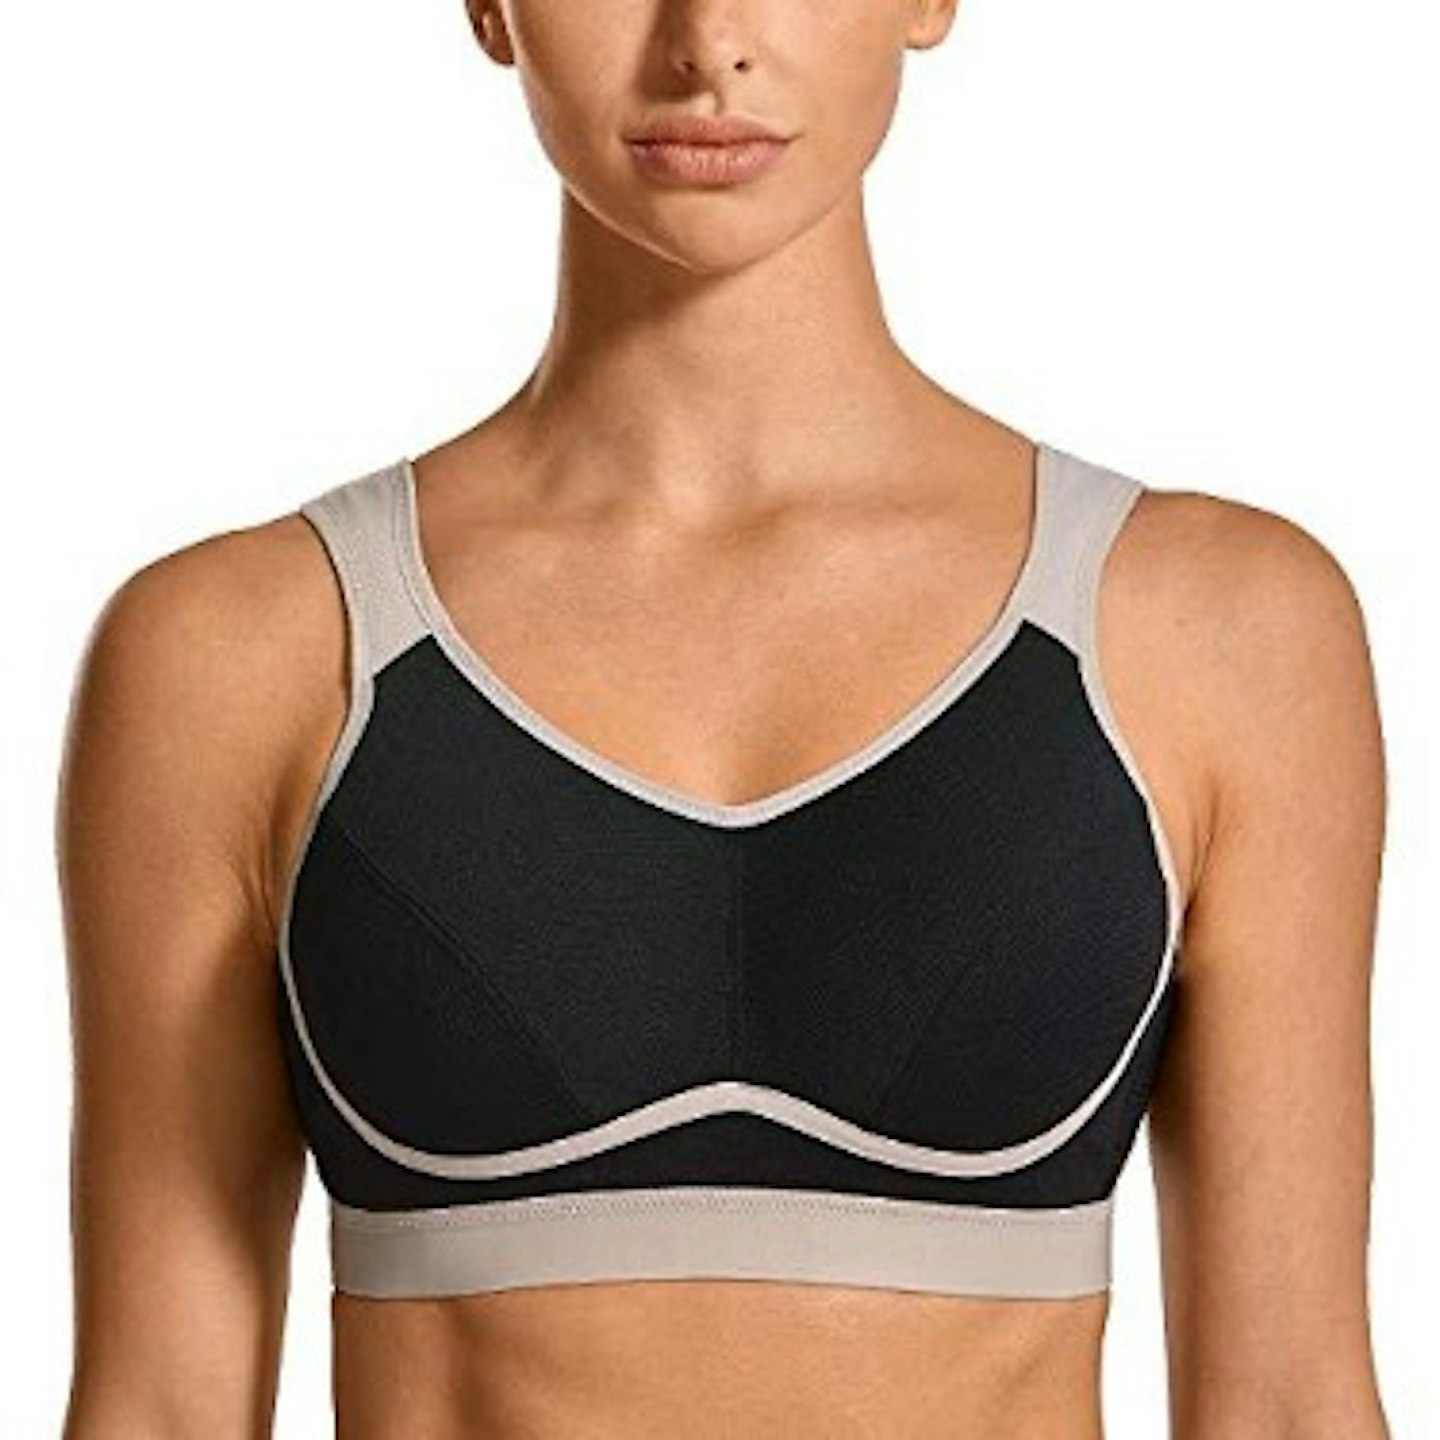 SYROKAN, Women's Workout Gym Support Bounce Control Plus Size High Impact Sports Bra Wirefree, from £16